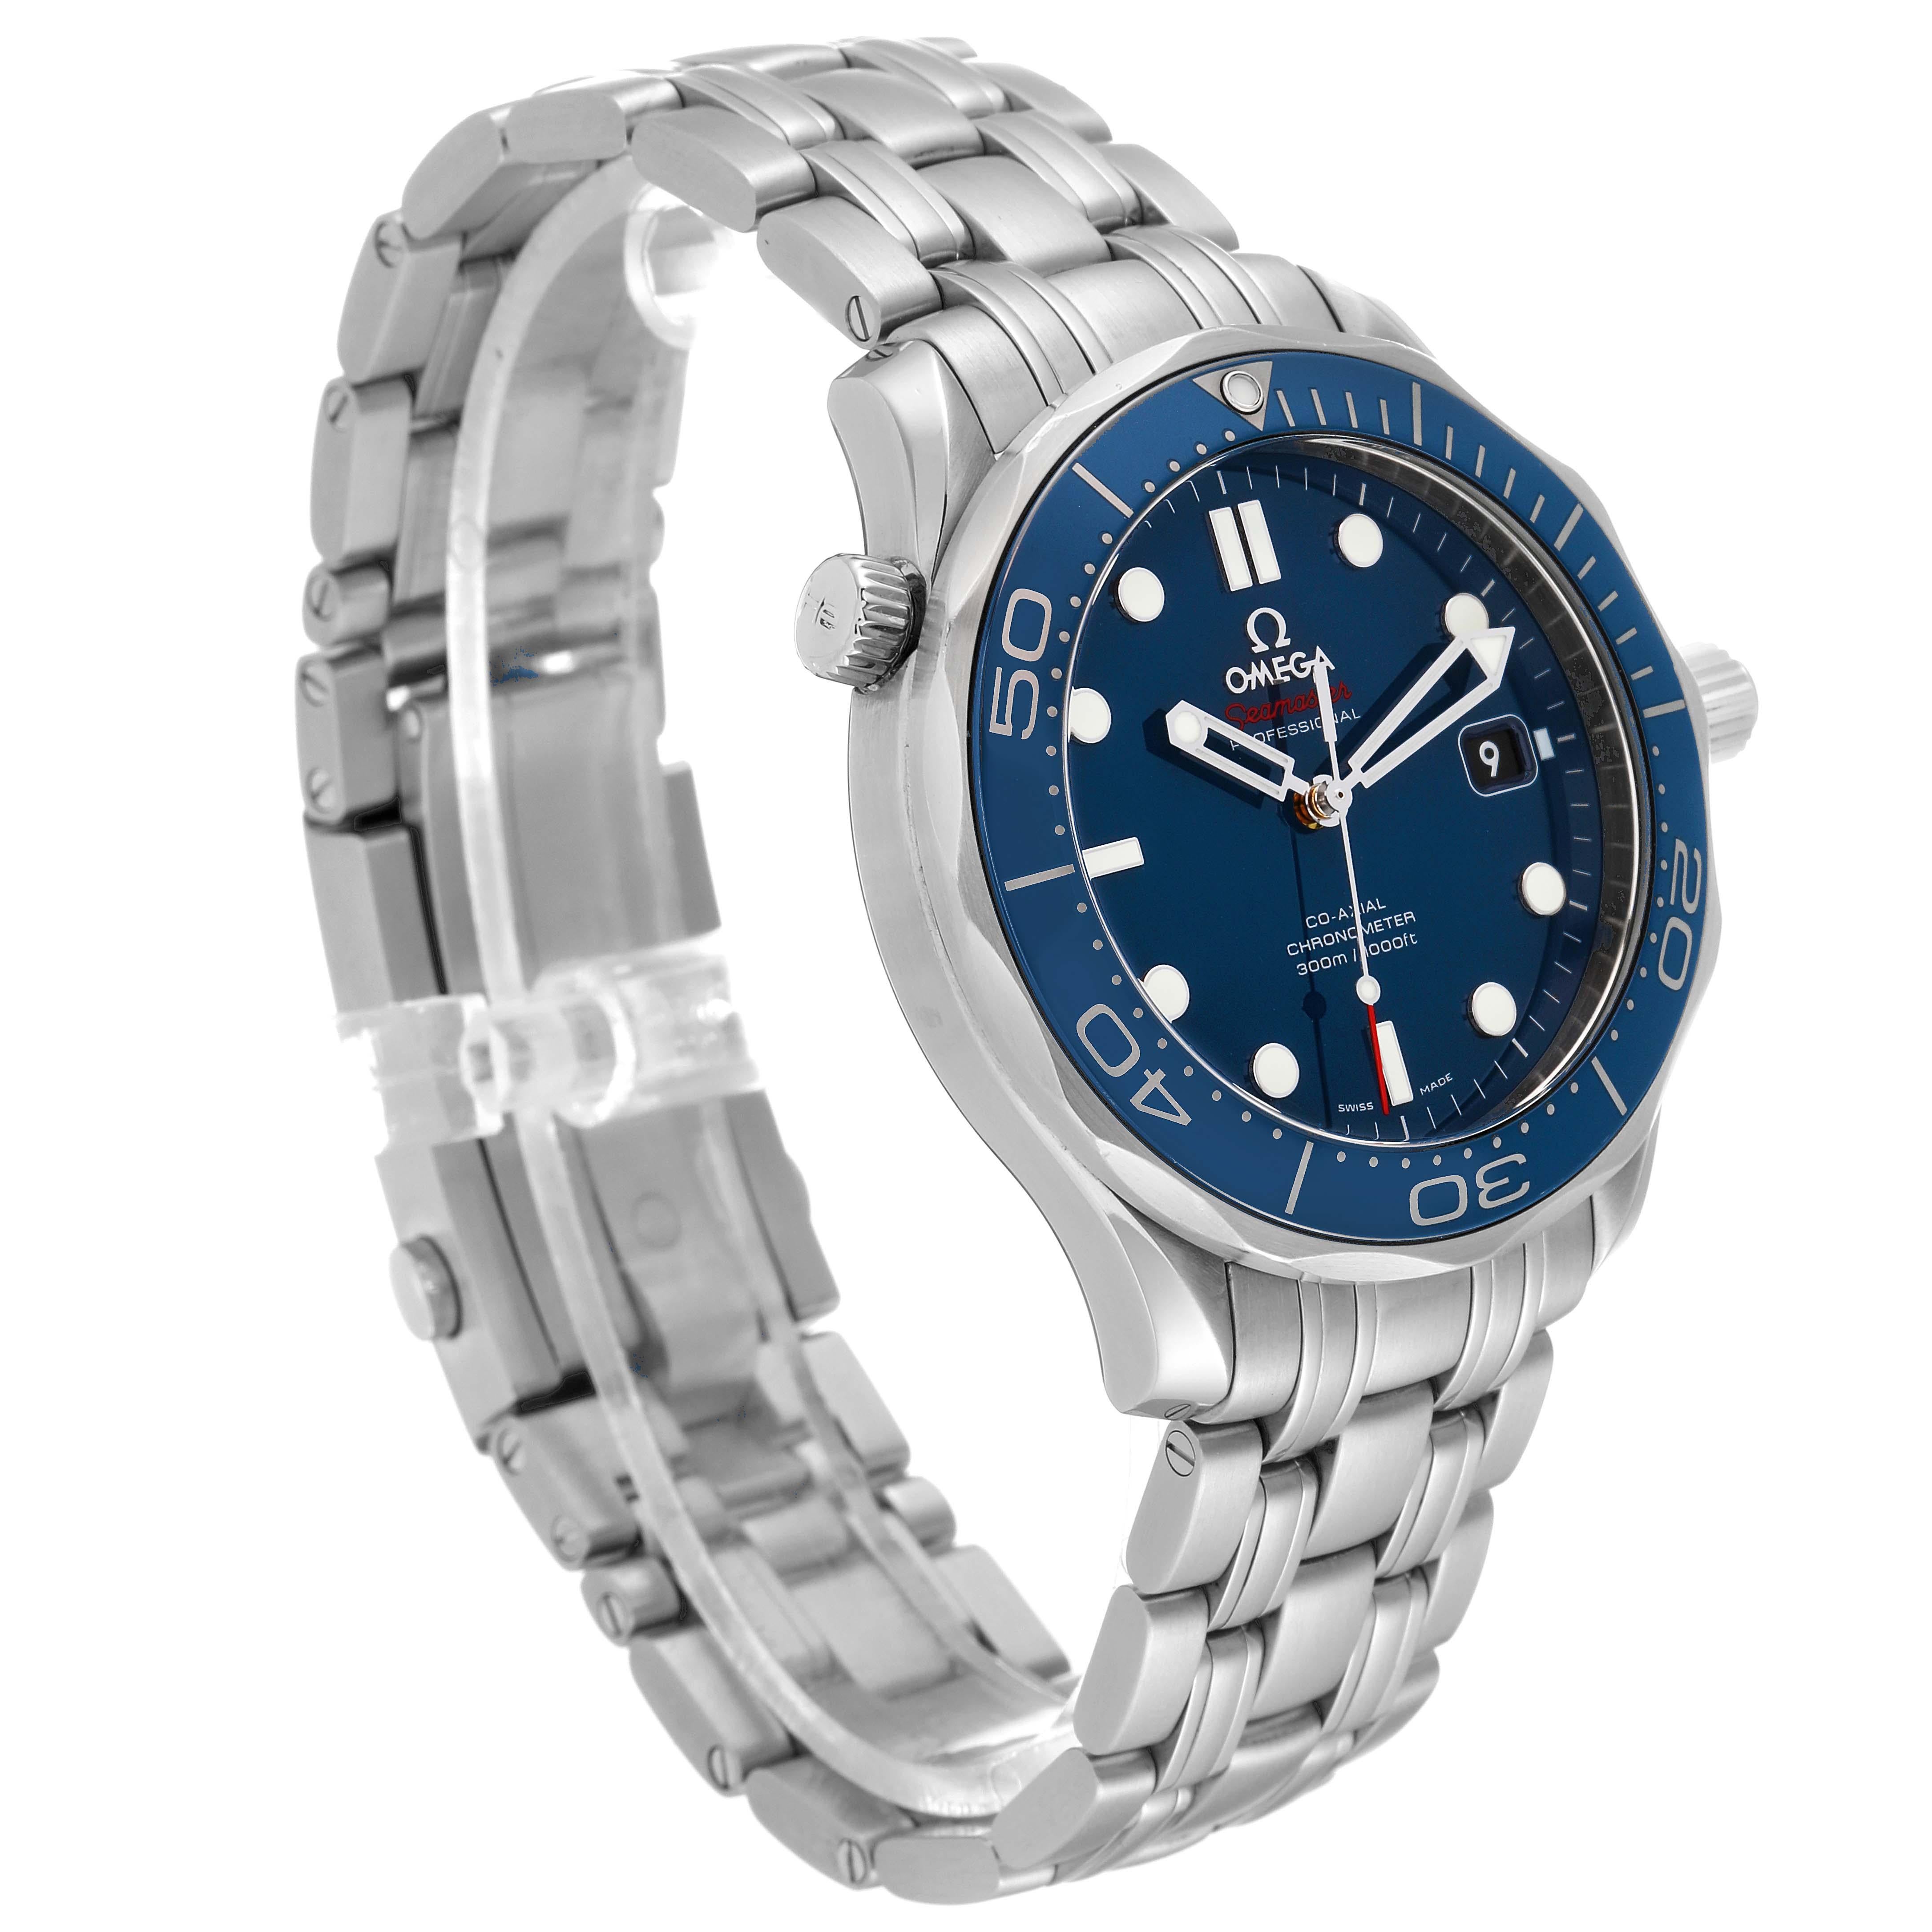 Omega Seamaster Diver 300M Steel Mens Watch 212.30.41.20.03.001. Automatic self-winding chronometer, Co-Axial Escapement movement with rhodium-plated finish. Stainless steel case 41.0 mm in diameter. Helium escape valve at 10 o'clock. Omega logo on